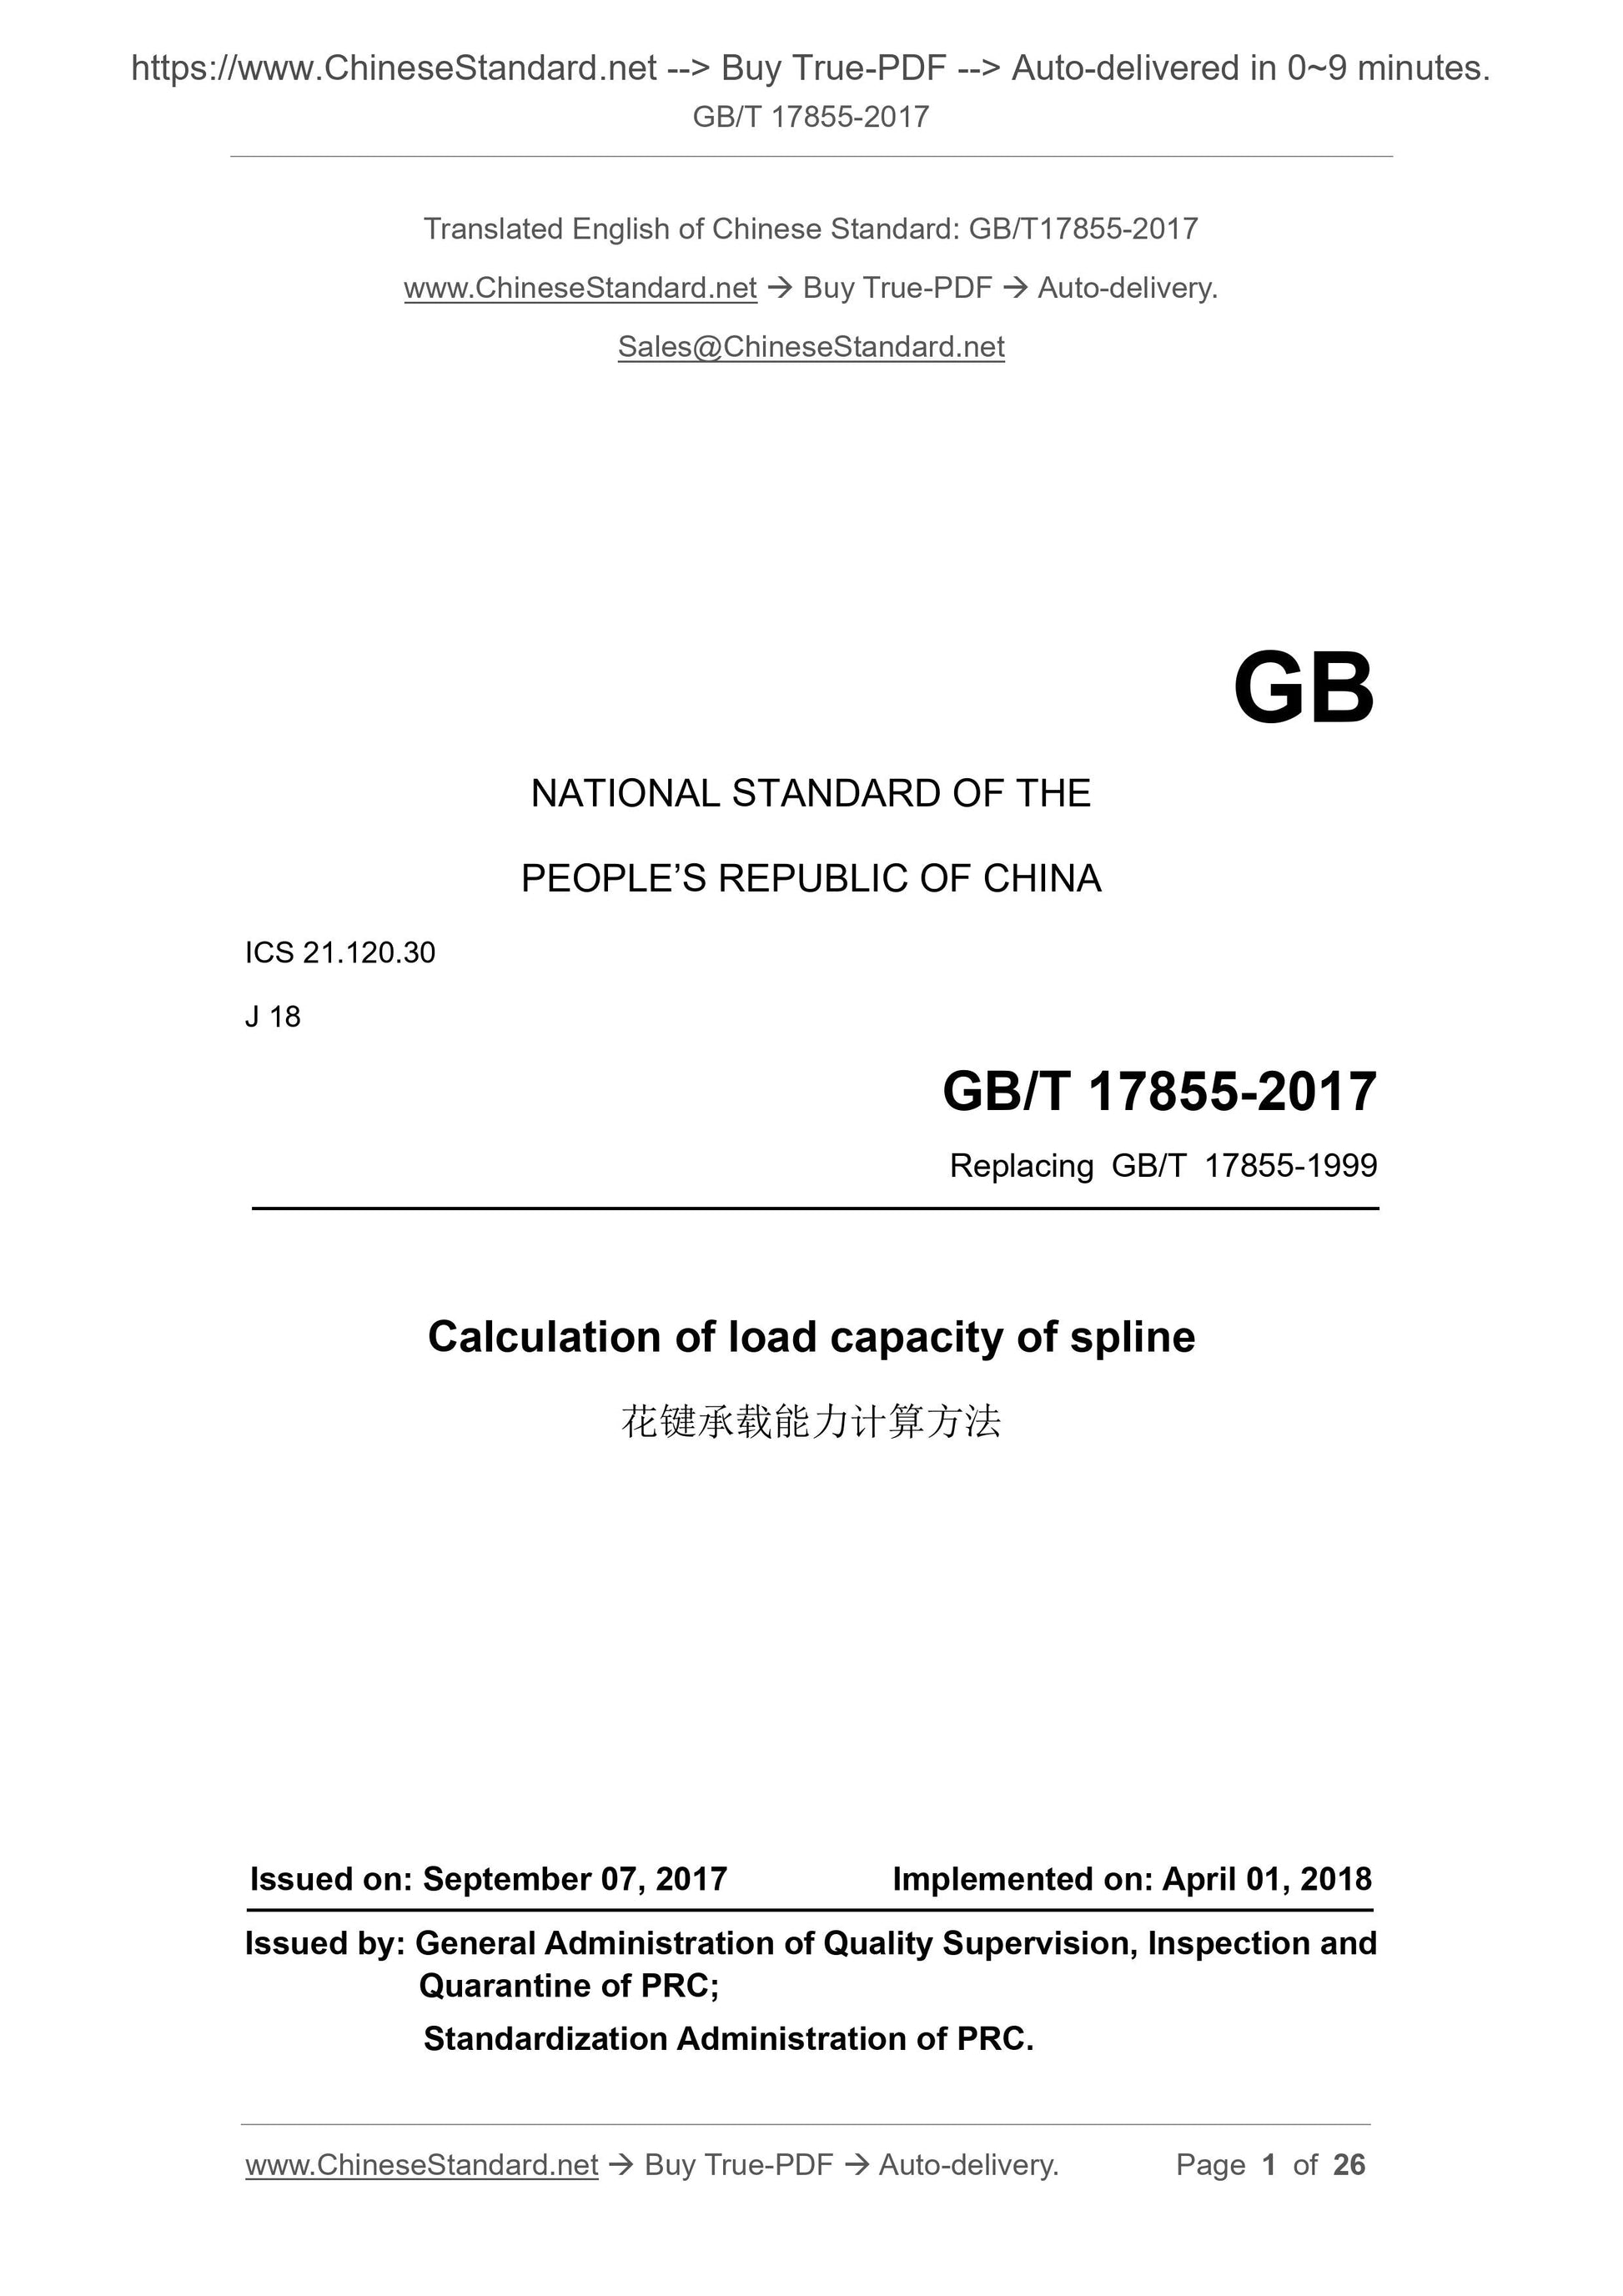 GB/T 17855-2017 Page 1